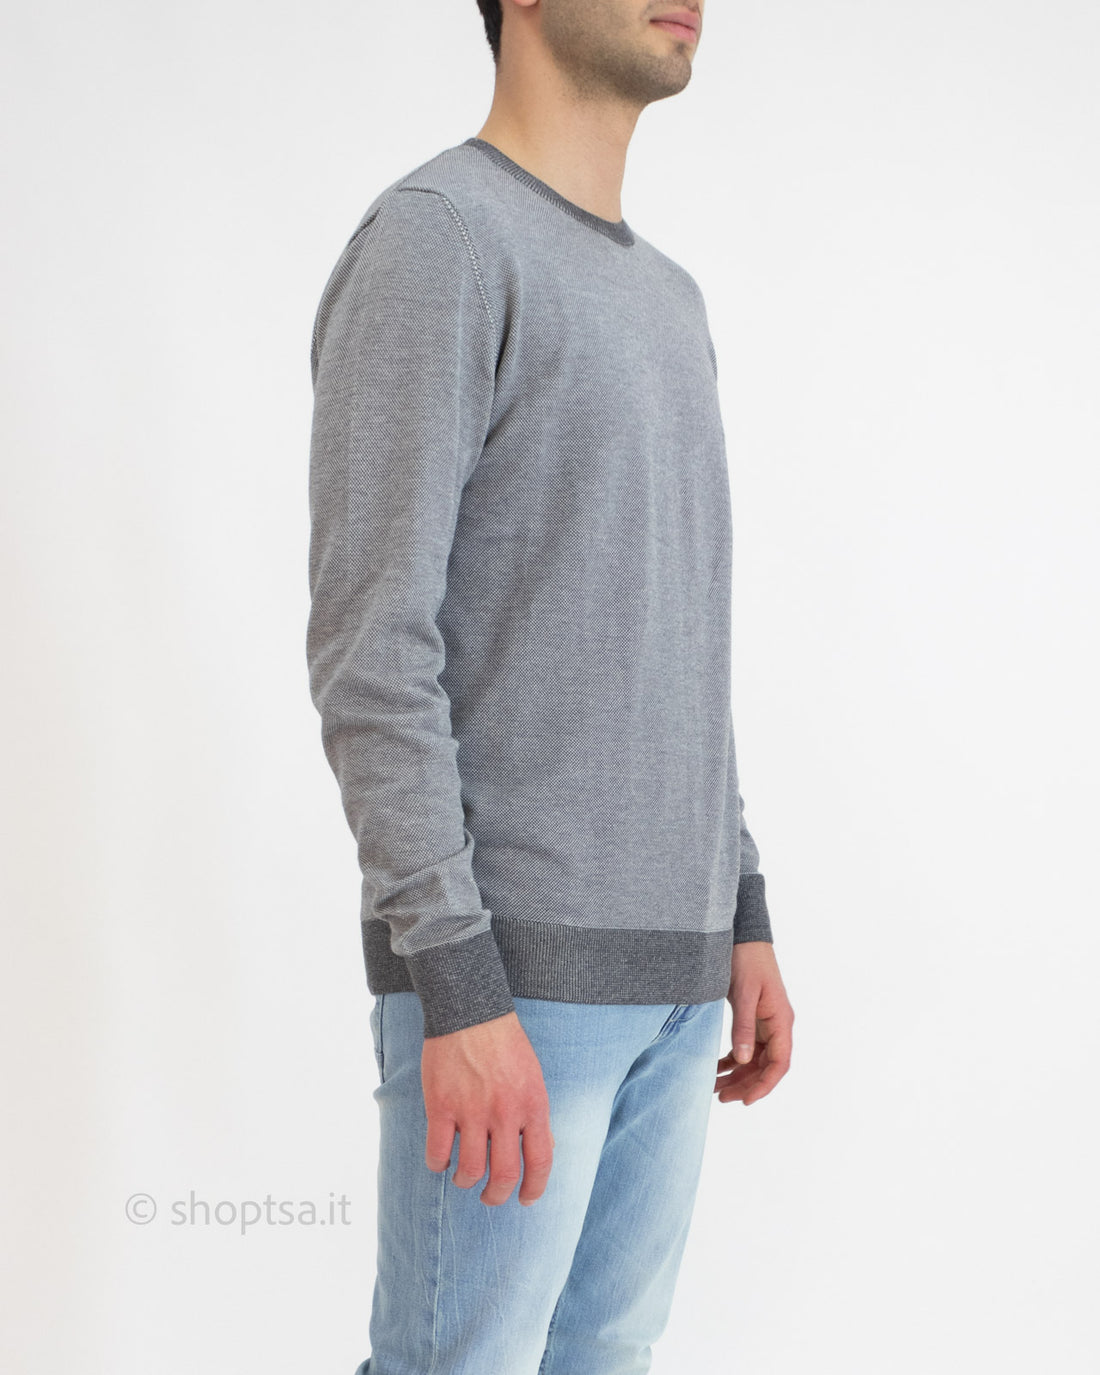 Double-knit cotton sweater